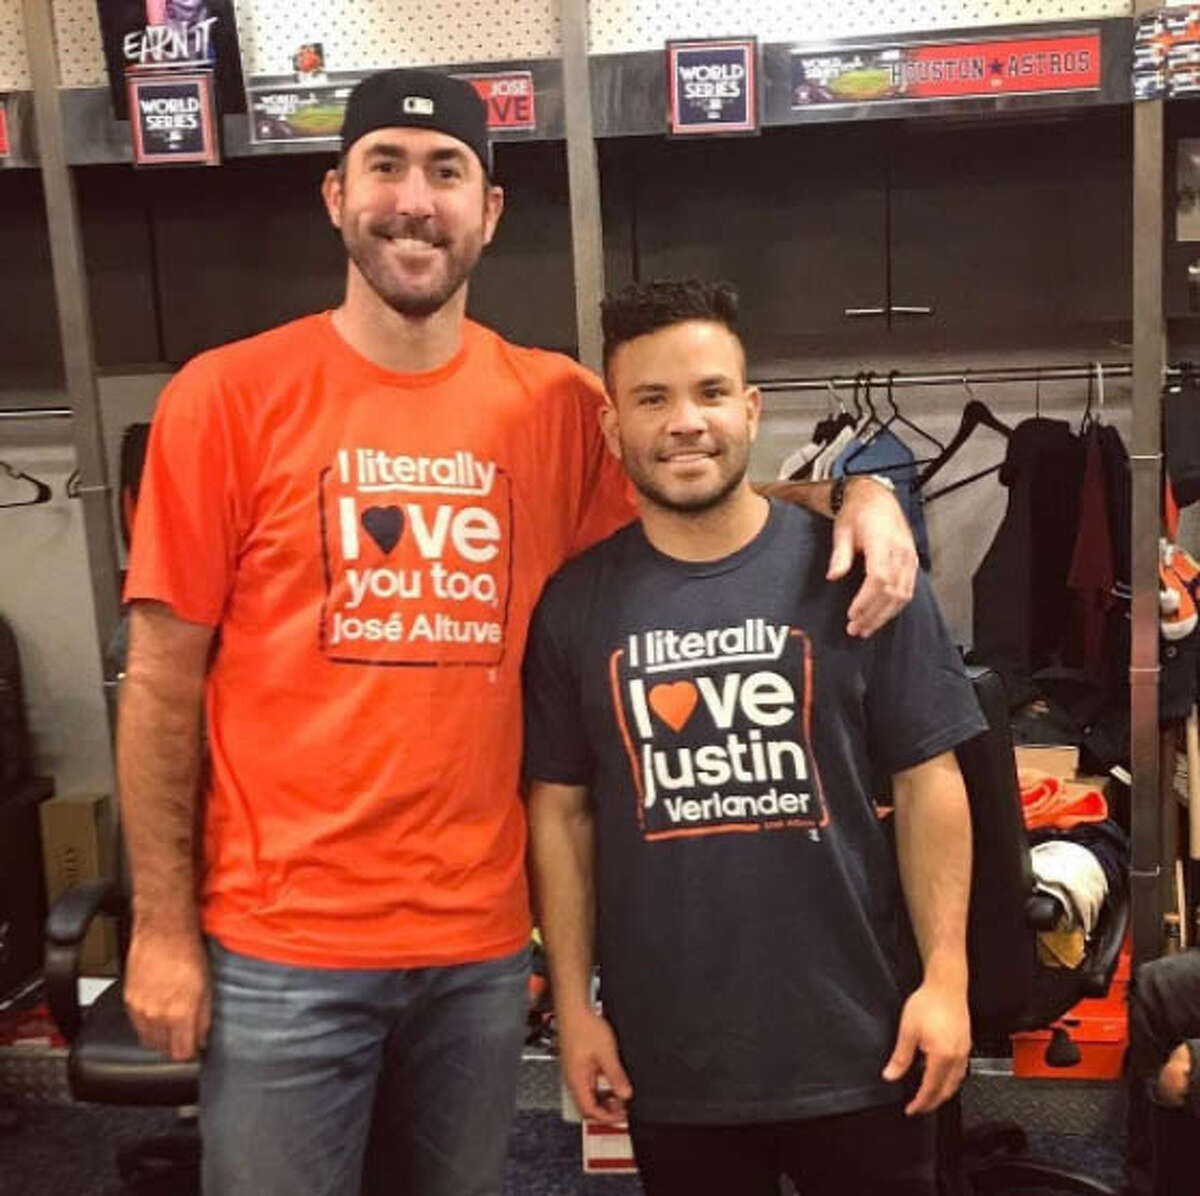 PHOTOS: Justin Verlander and Jose Altuve showing each other love The Astros' Justin Verlander and Jose Altuve pose together with their new T-shirts.